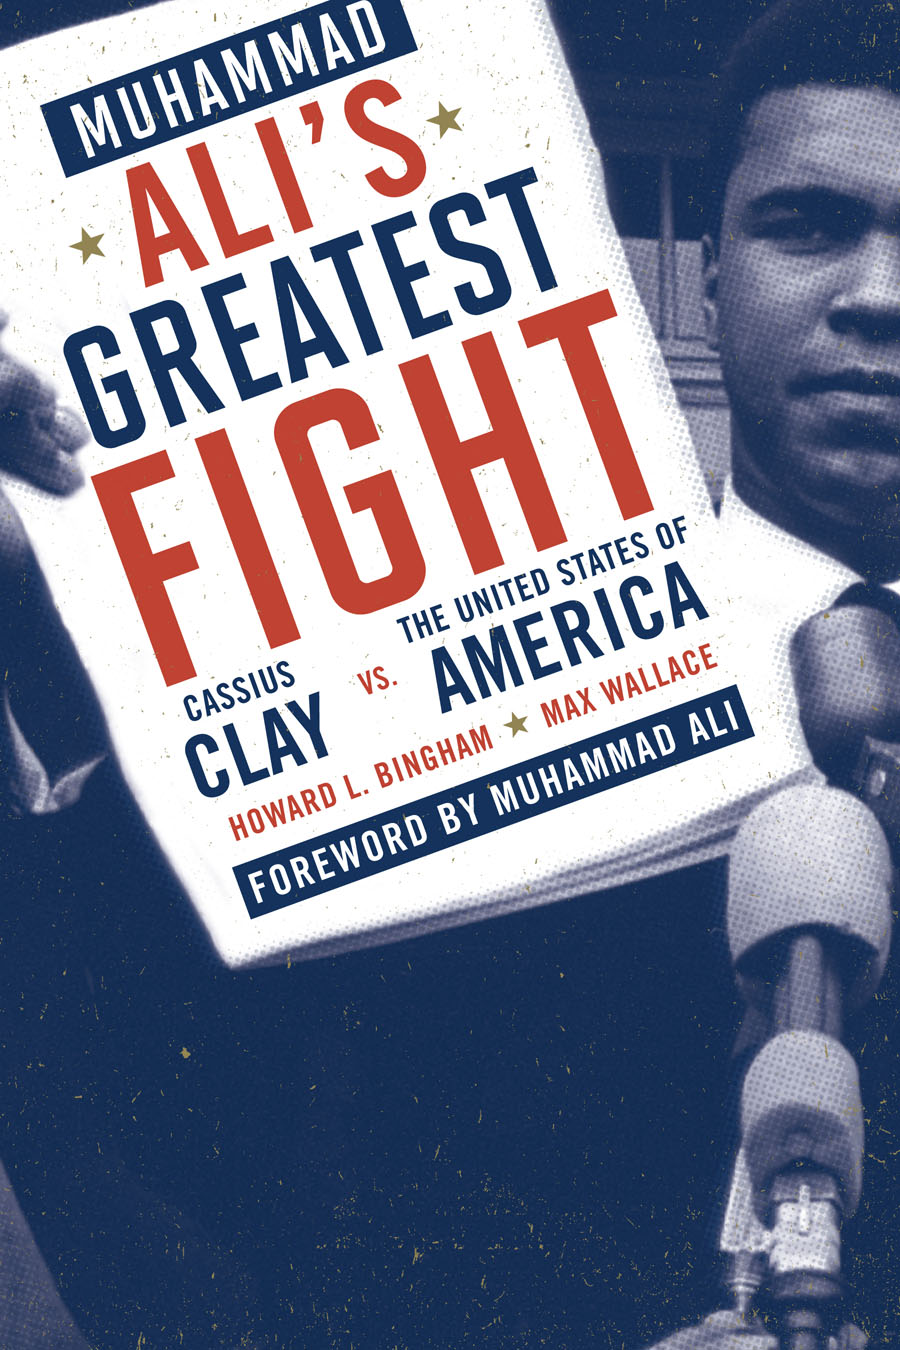 MUHAMMAD ALIS GREATEST FIGHT Cassius Clay vs the United States of America - photo 1